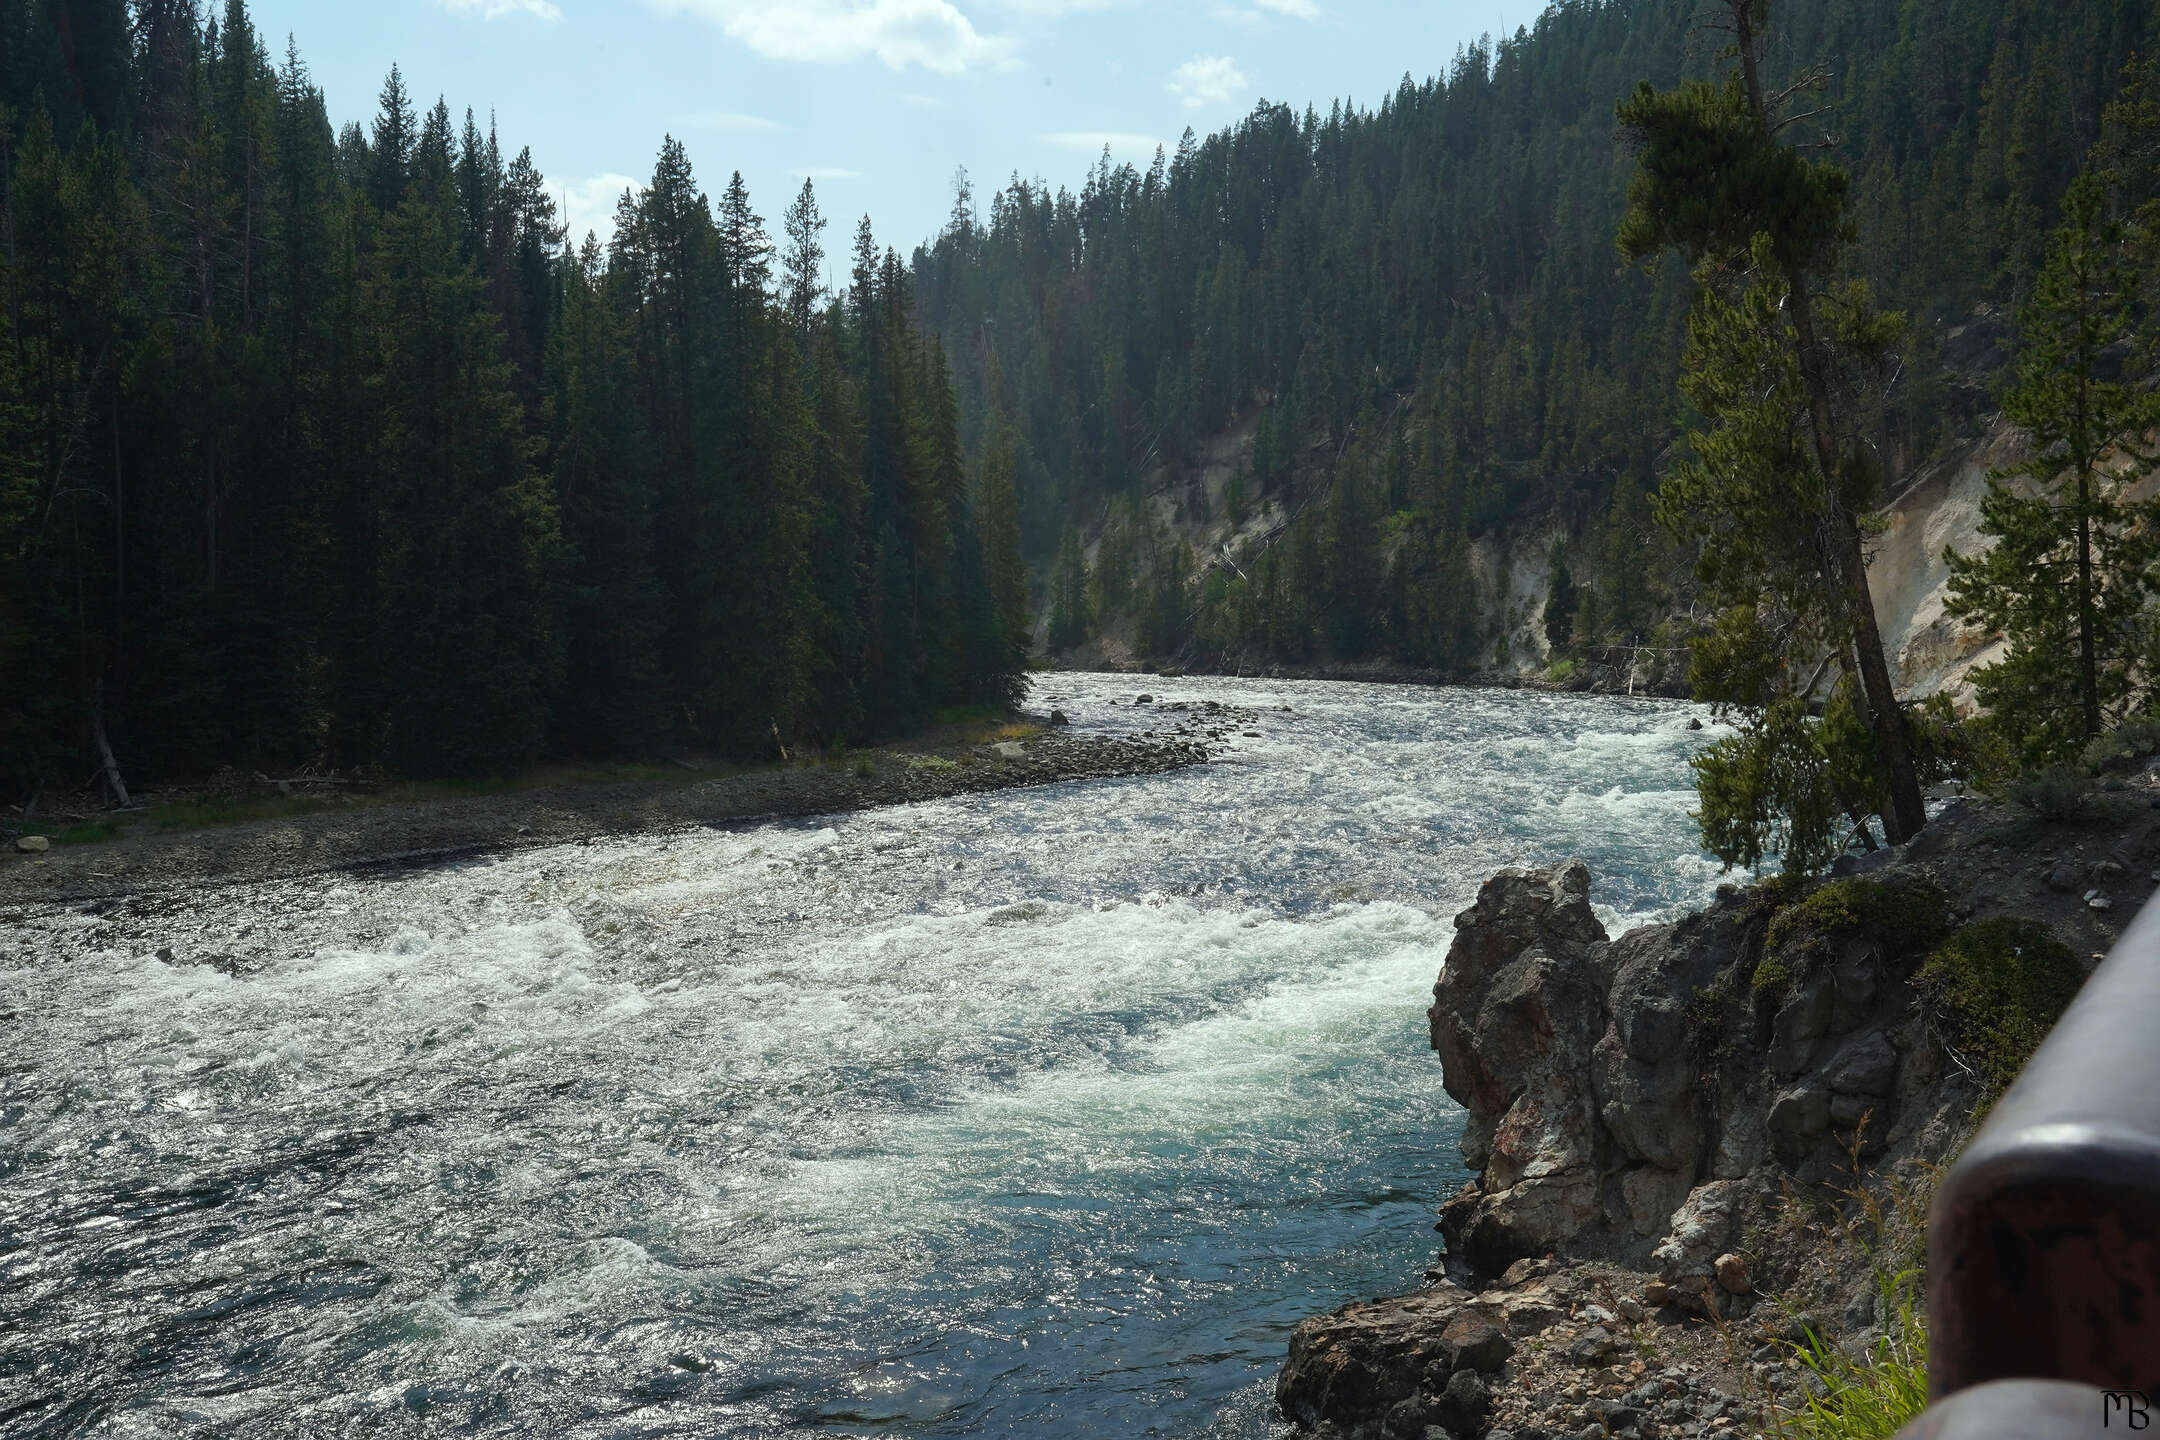 The river coming up to the falls